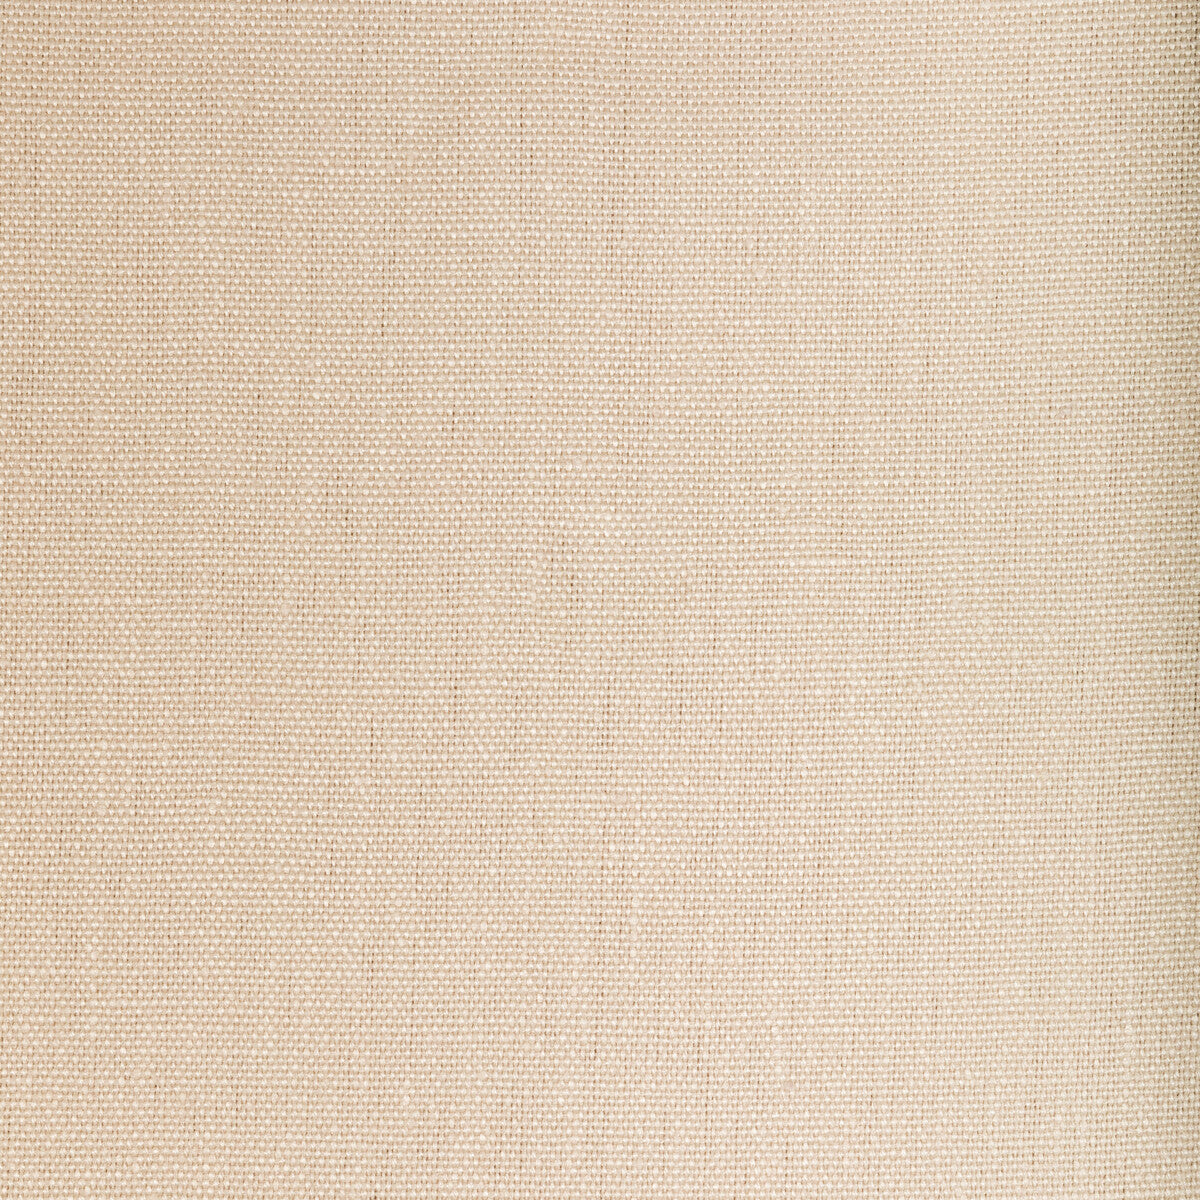 Kravet Basics fabric in 32260-1616 color - pattern 32260.1616.0 - by Kravet Basics in the Perfect Plains collection